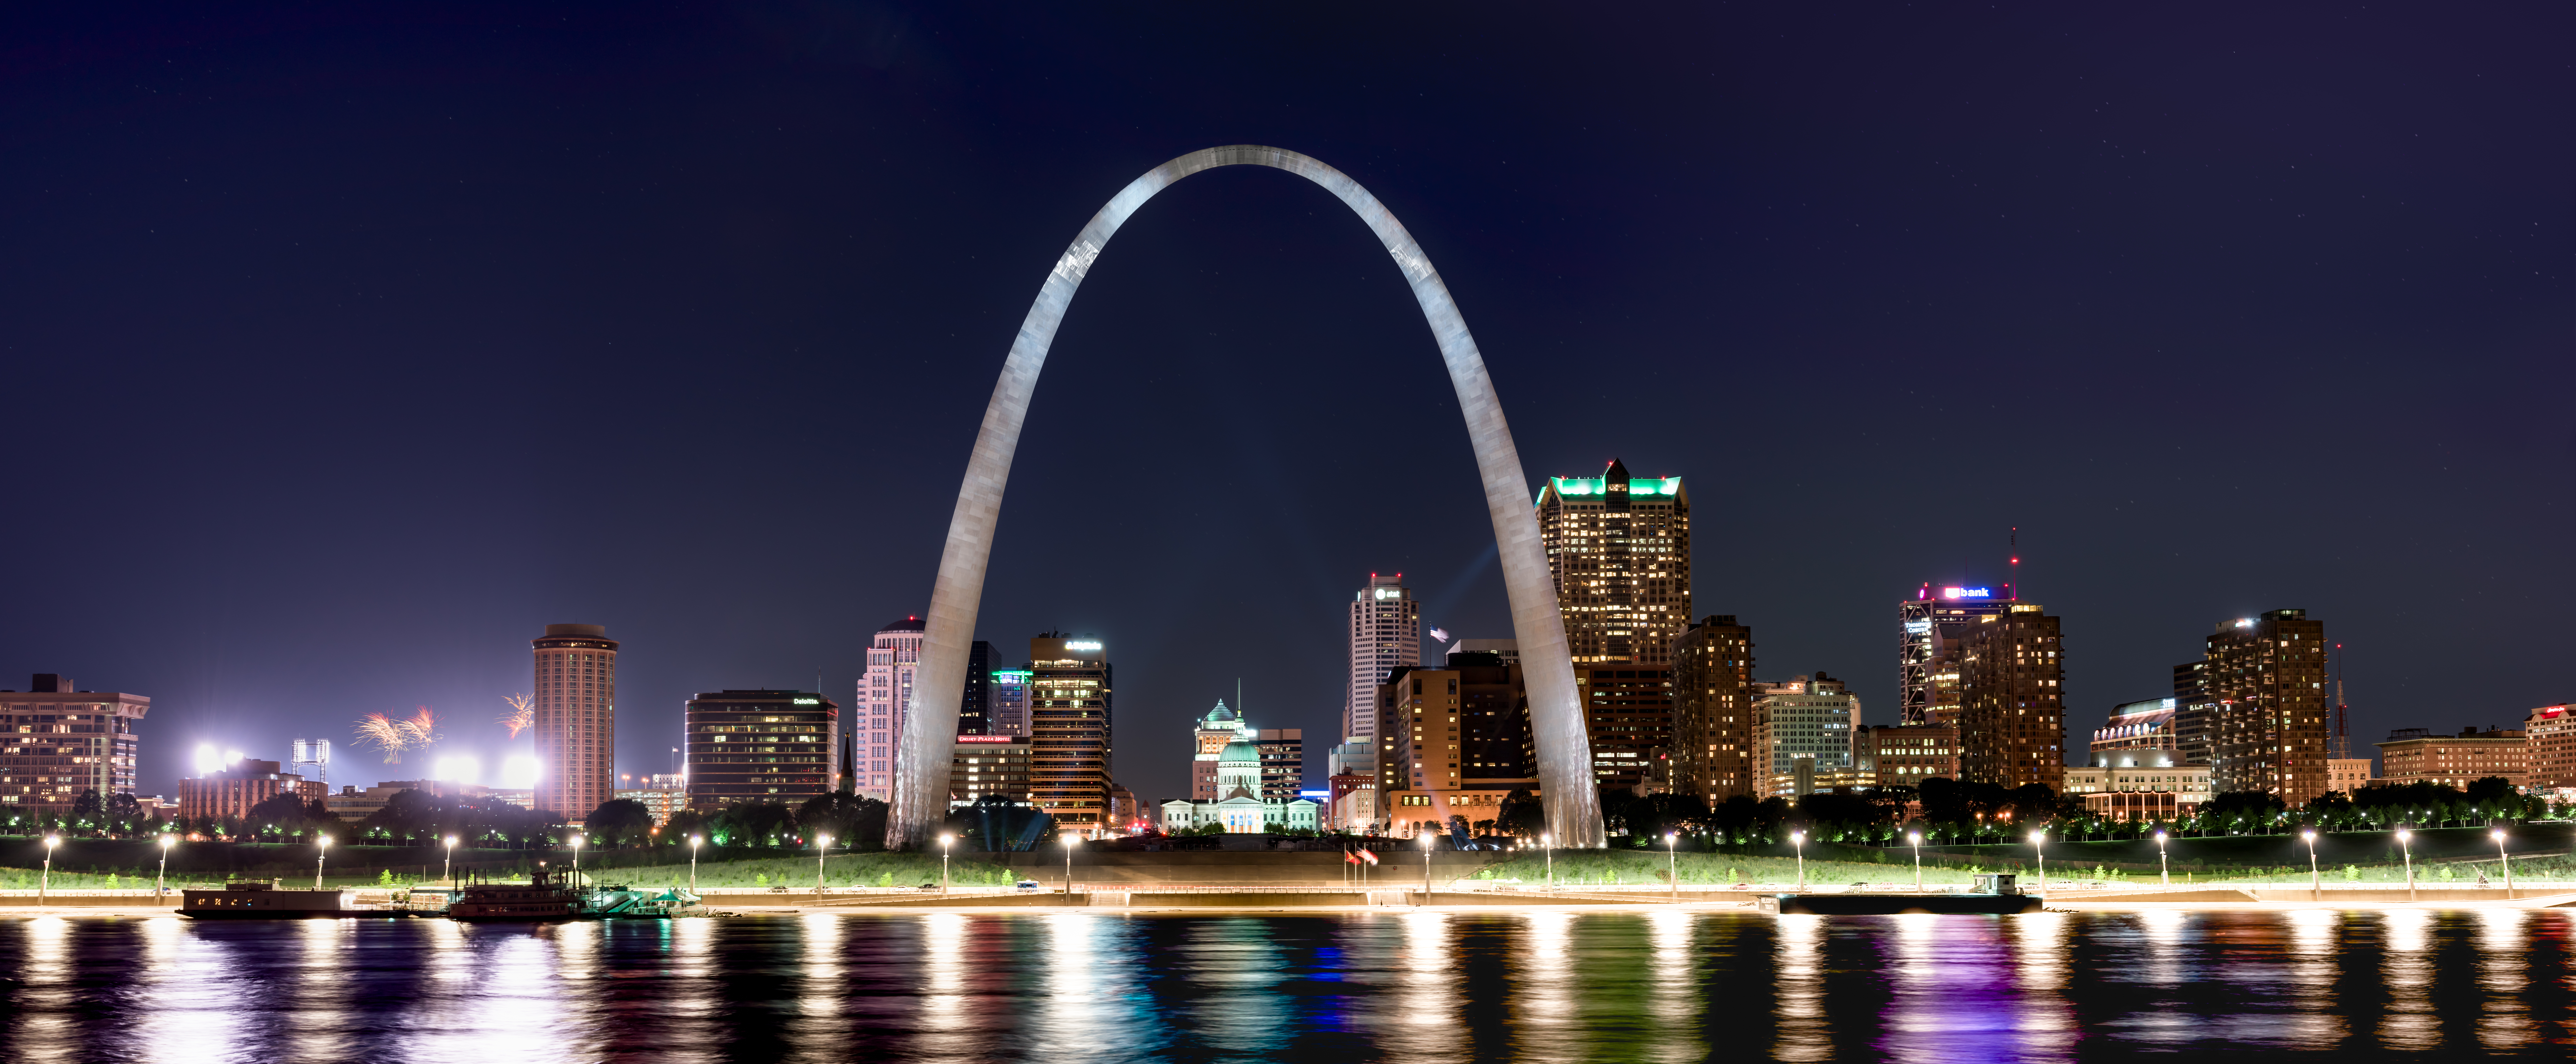 For a long weekend of family fun, meet me in St. Louis